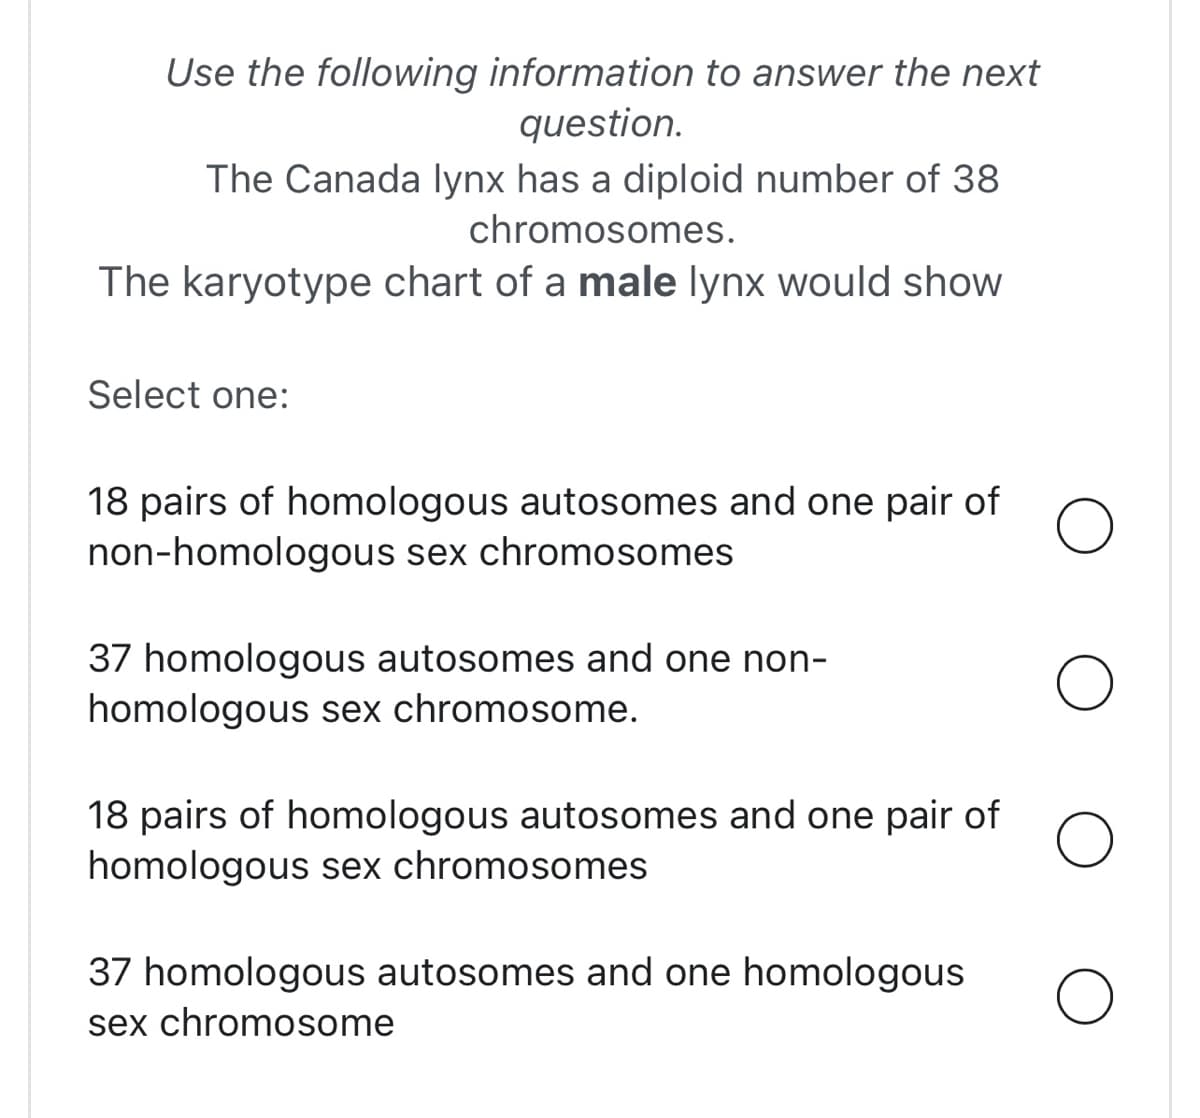 Use the following information to answer the next
question.
The Canada lynx has a diploid number of 38
chromosomes.
The karyotype chart of a male lynx would show
Select one:
18 pairs of homologous autosomes and one pair of
non-homologous sex chromosomes
37 homologous autosomes and one non-
homologous sex chromosome.
18 pairs of homologous autosomes and one pair of
homologous sex chromosomes
37 homologous autosomes and one homologous
sex chromosome
O
O